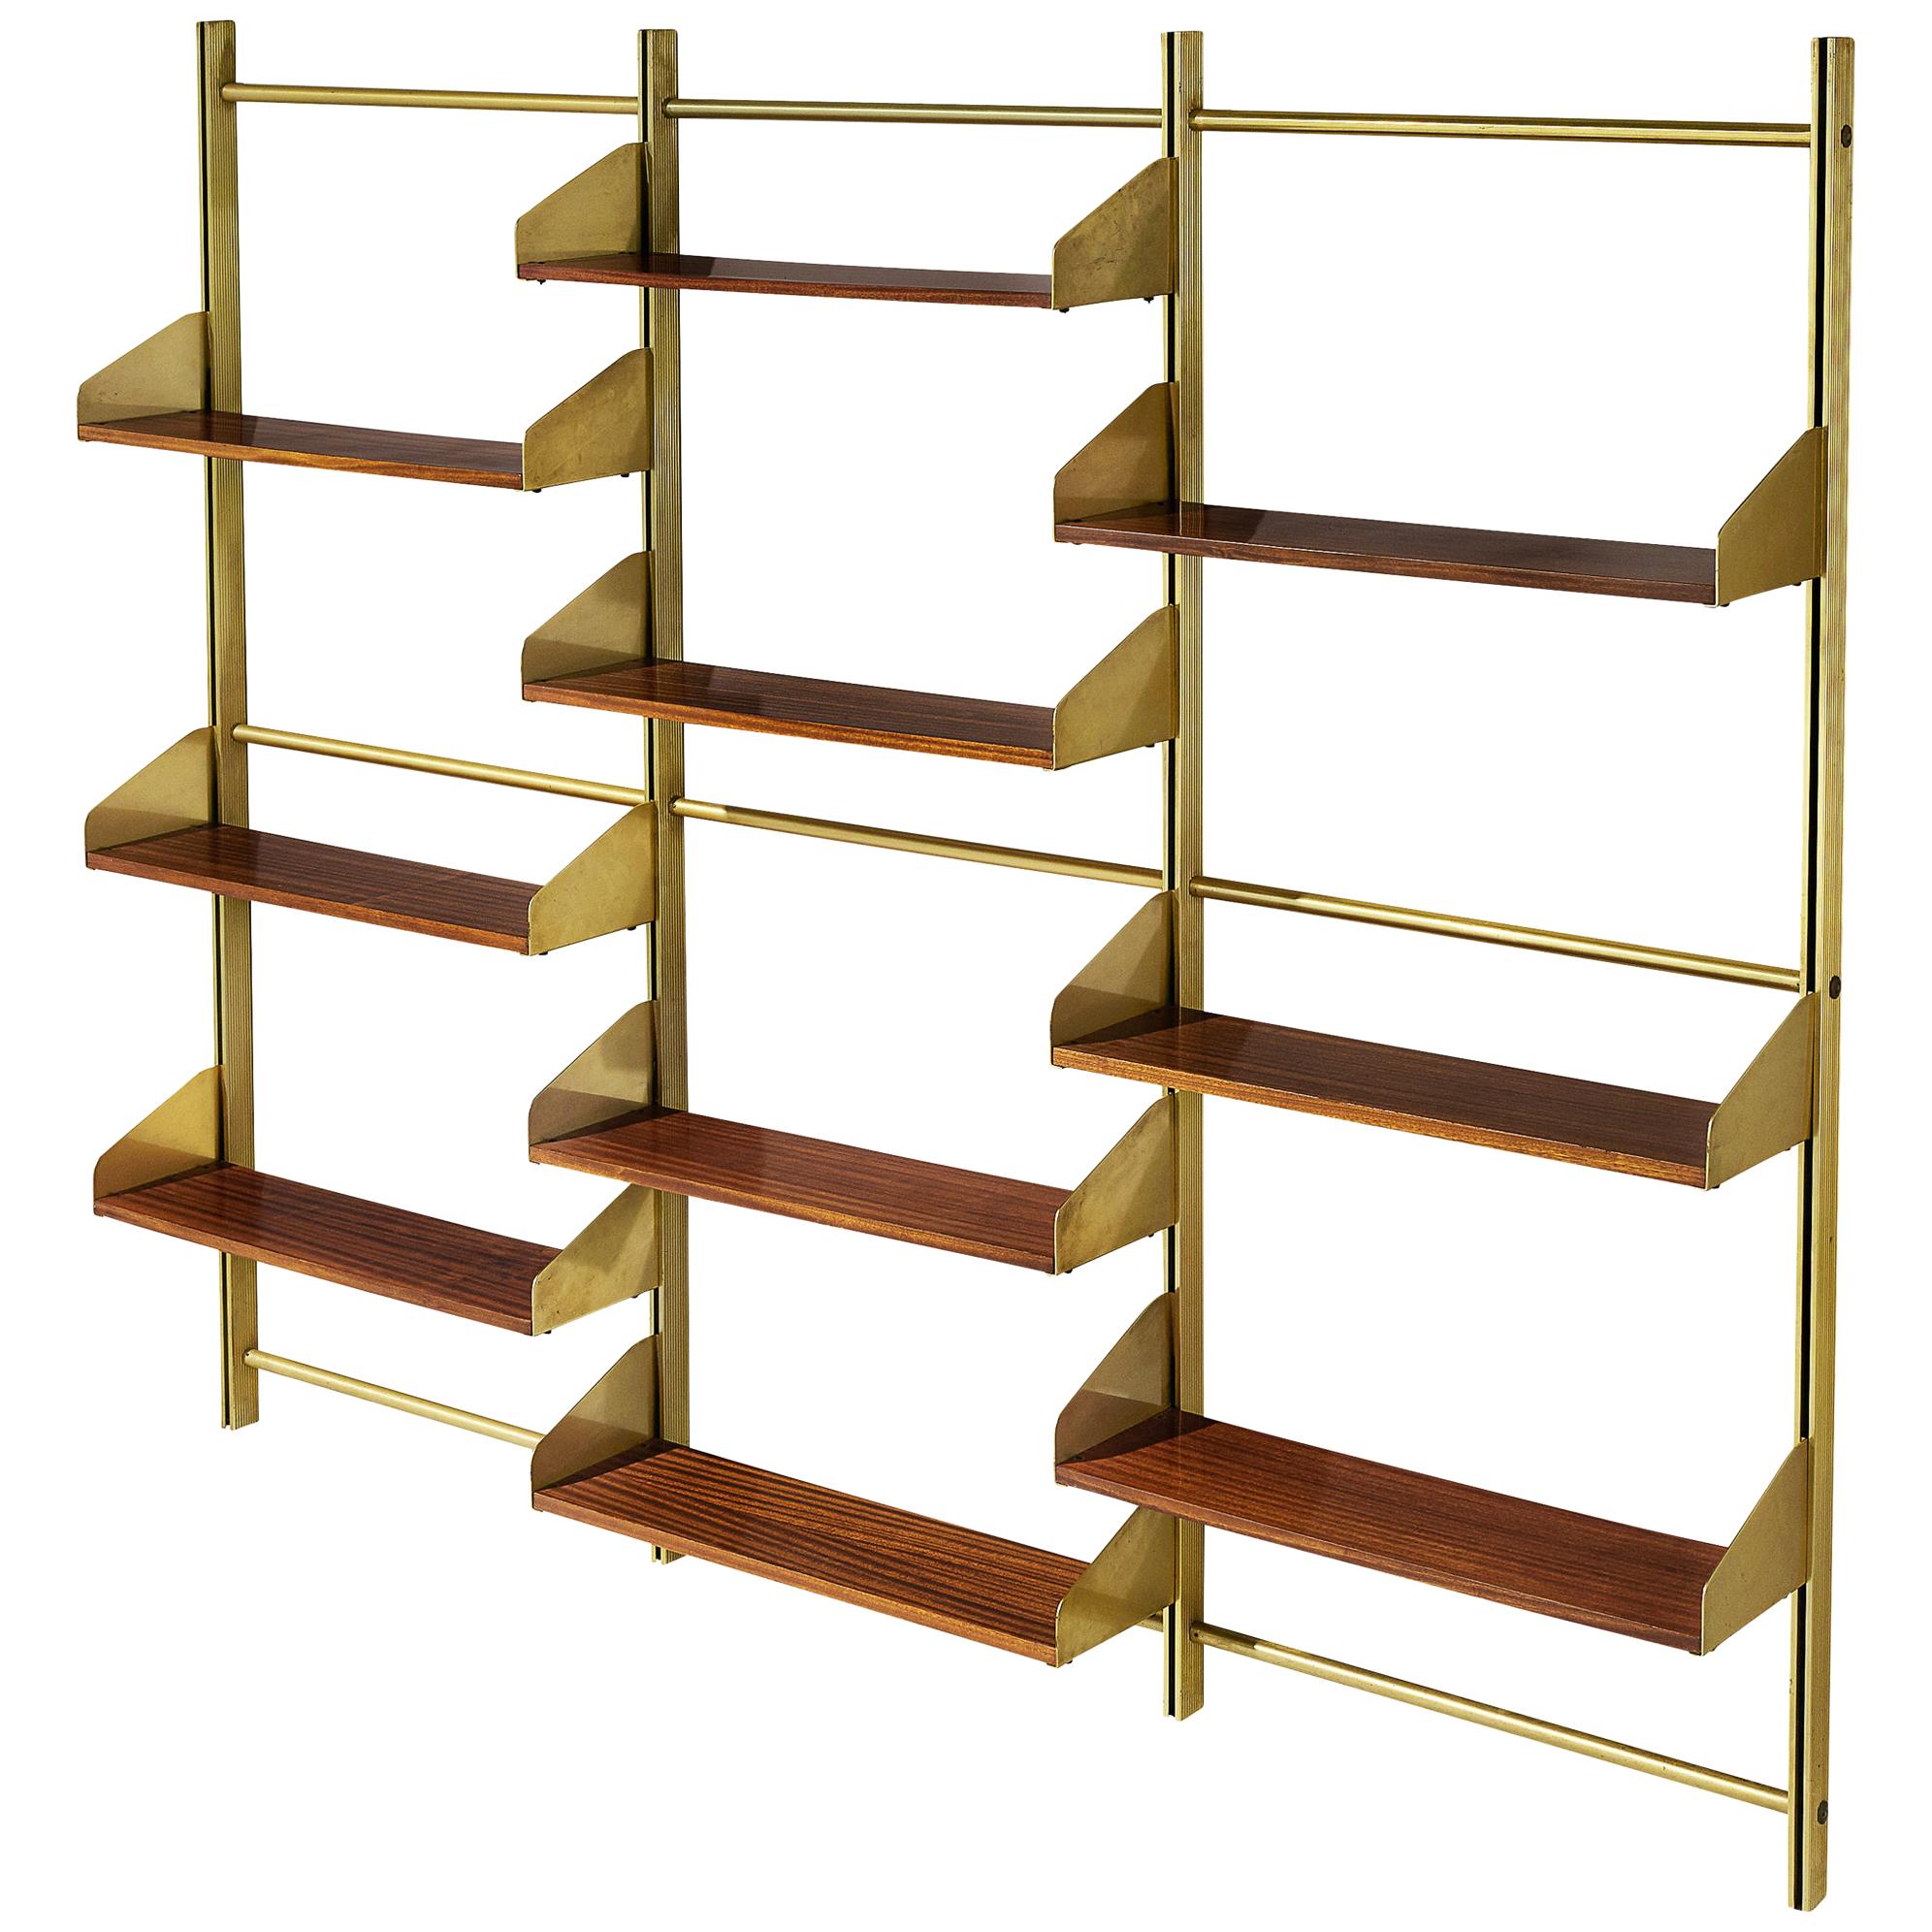 Feal, wall unit, teak, brass and brassed aluminum, Italy, 1950s

This eloquent wall unit from Italy is made with a brassed aluminum frame, connective joints and plenty of teak shelves. Three columns structure the shelf vertically. The combination